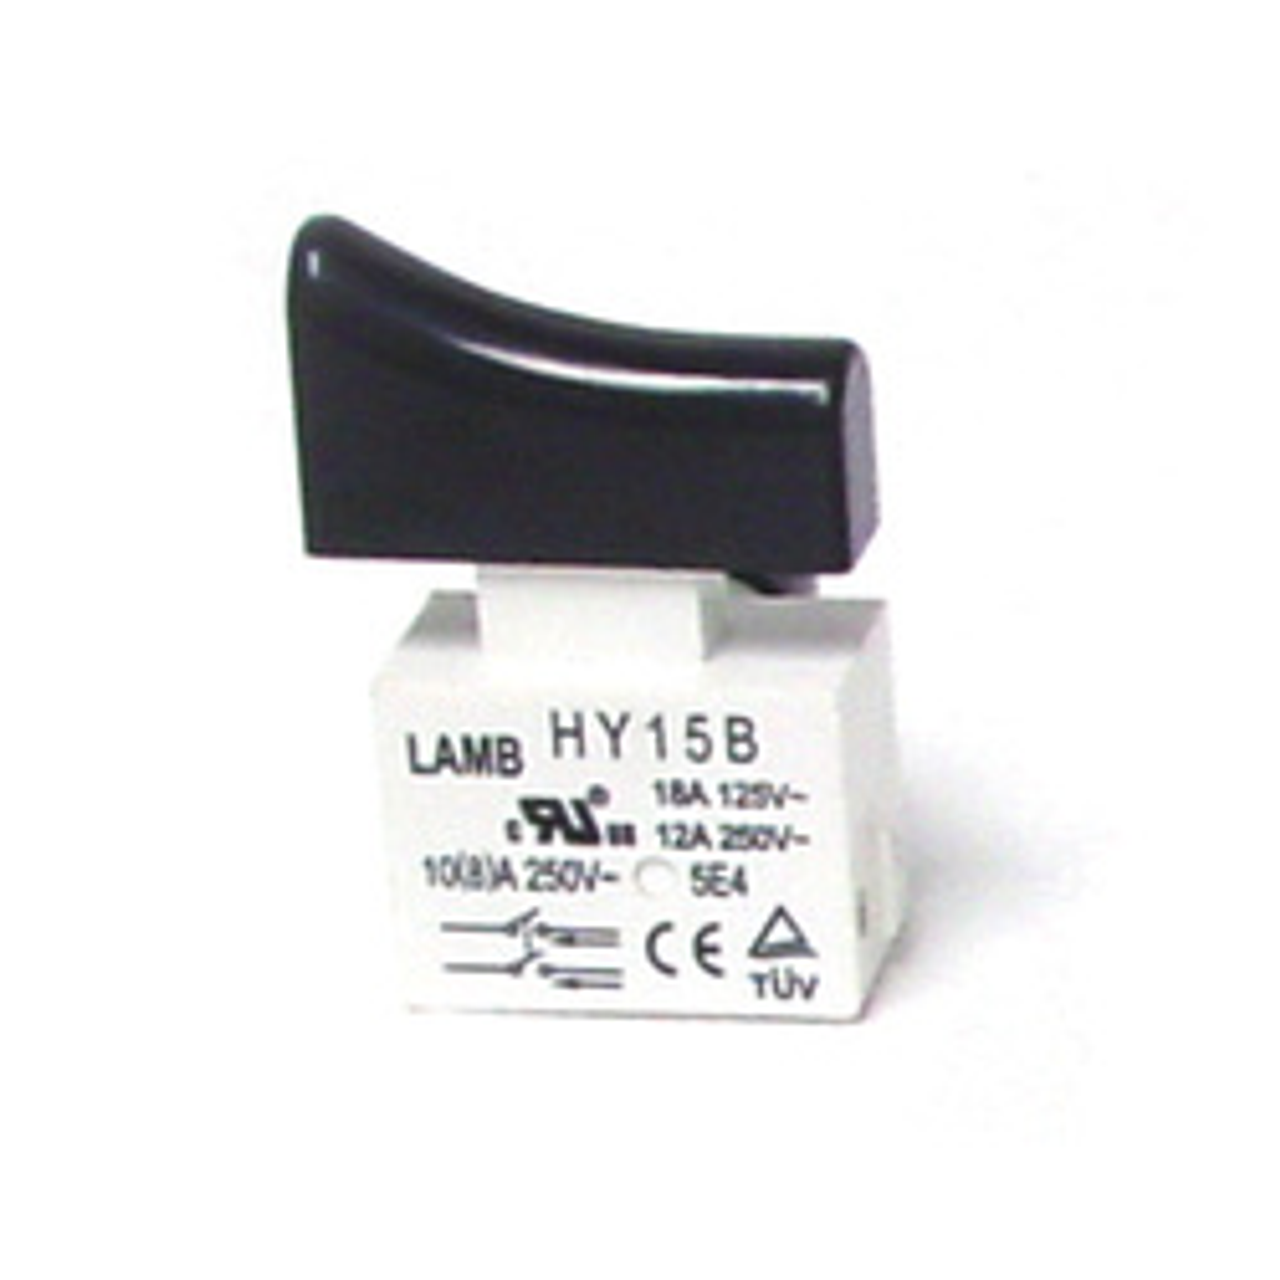 E-Switch HY106-6Y7-411-0000 Tool and Trigger Switches